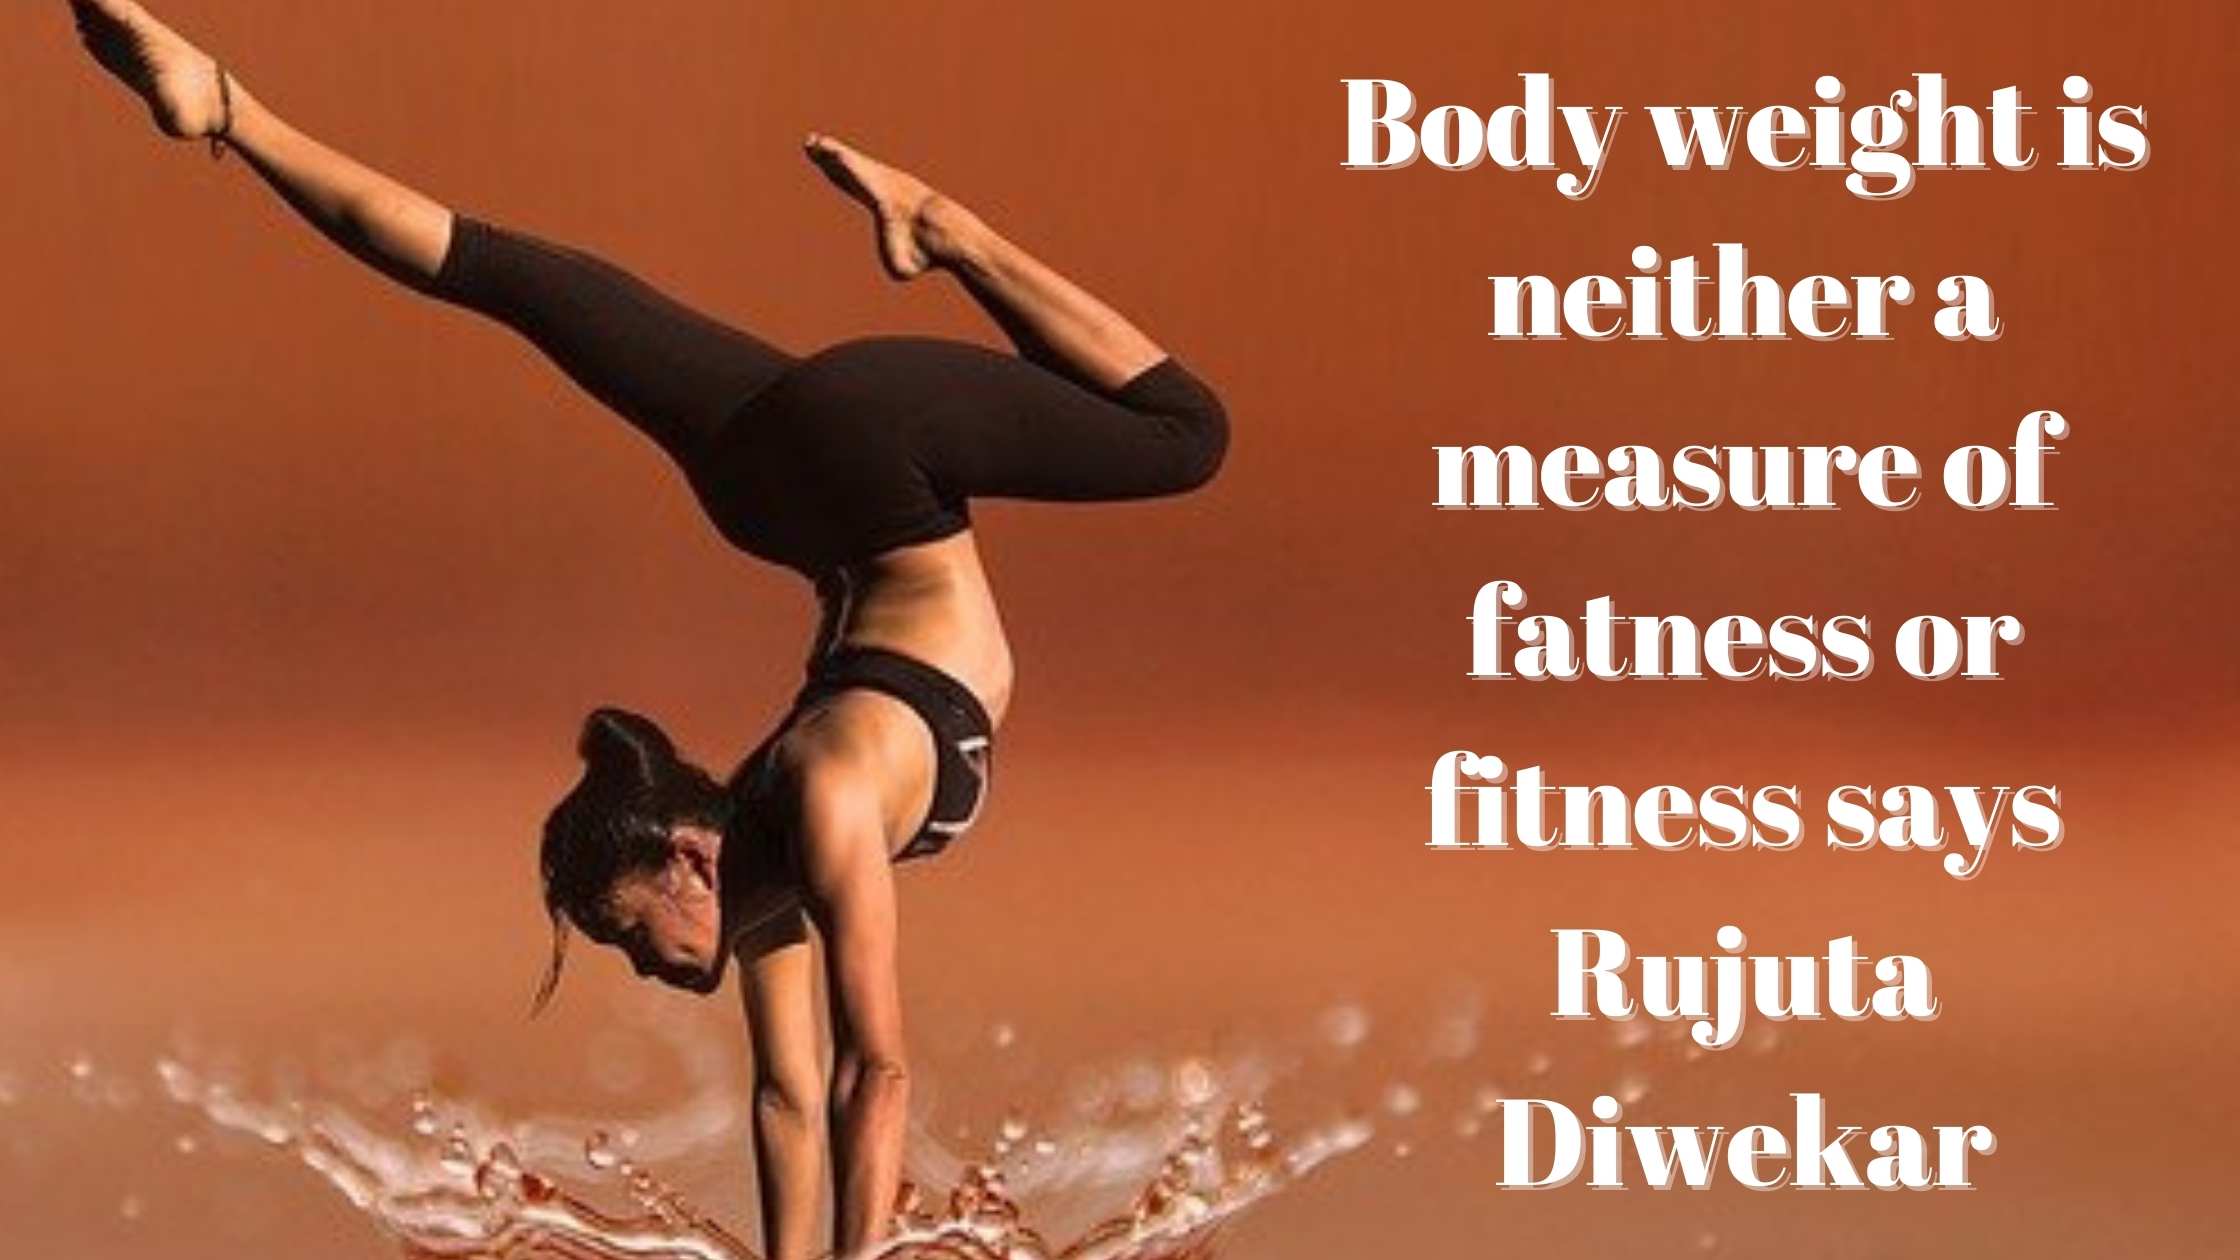 Body weight is neither a measure of fatness or fitness says Rujuta Diwekar